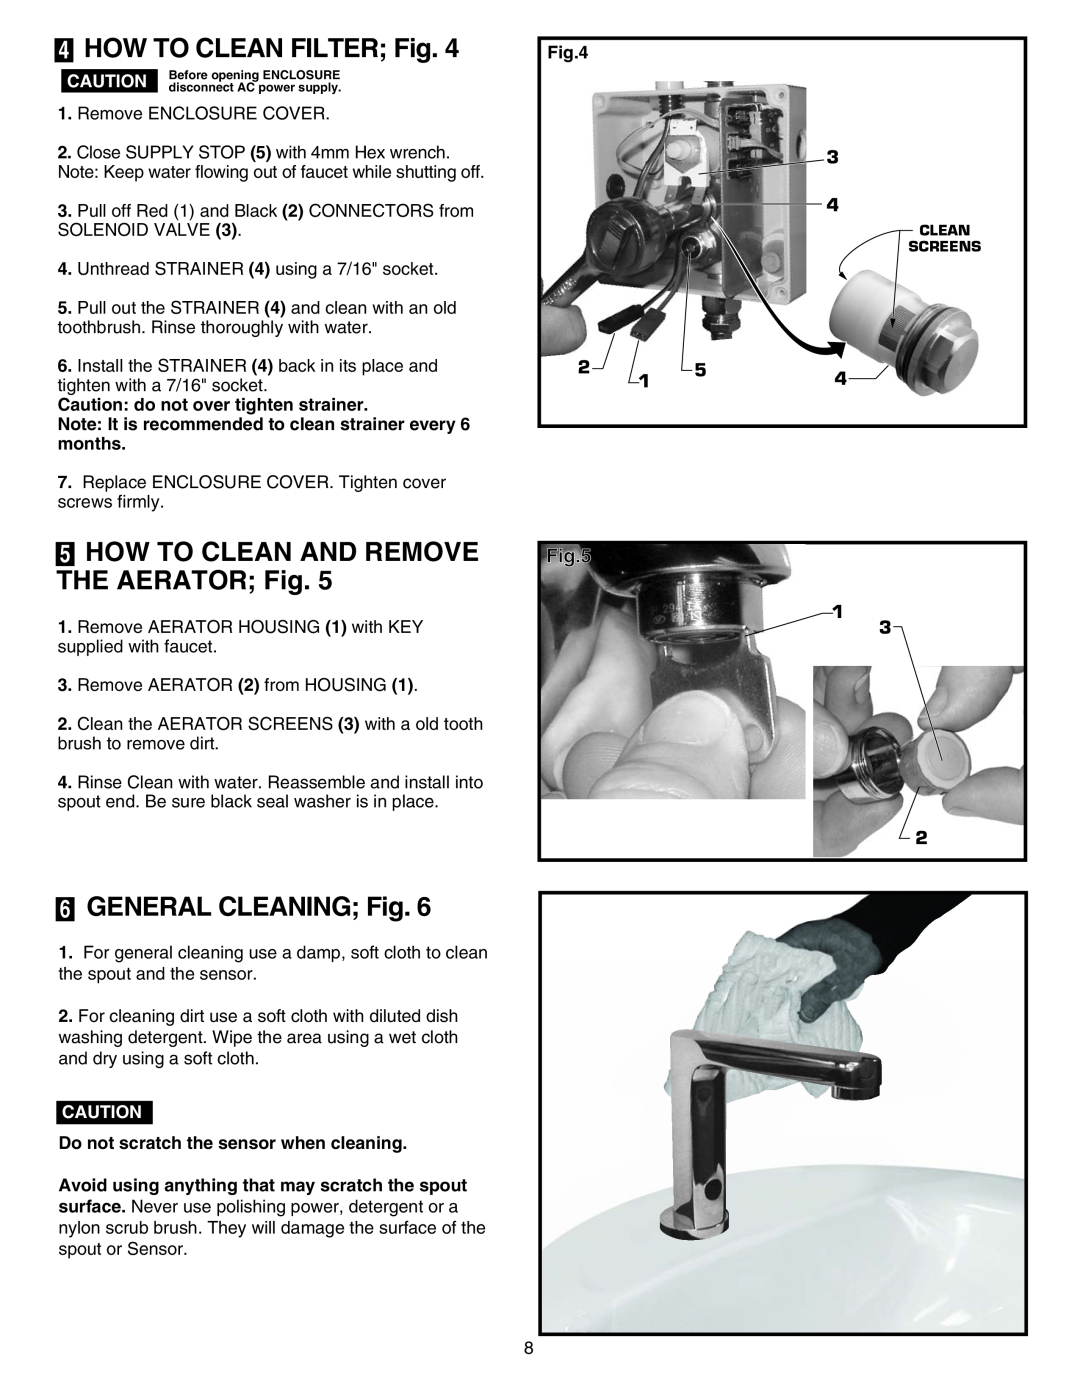 American Standard 256.1XX warranty HOW TO CLEAN FILTER Fig, 5HOW TO CLEAN AND REMOVE THE AERATOR Fig, GENERAL CLEANING Fig 